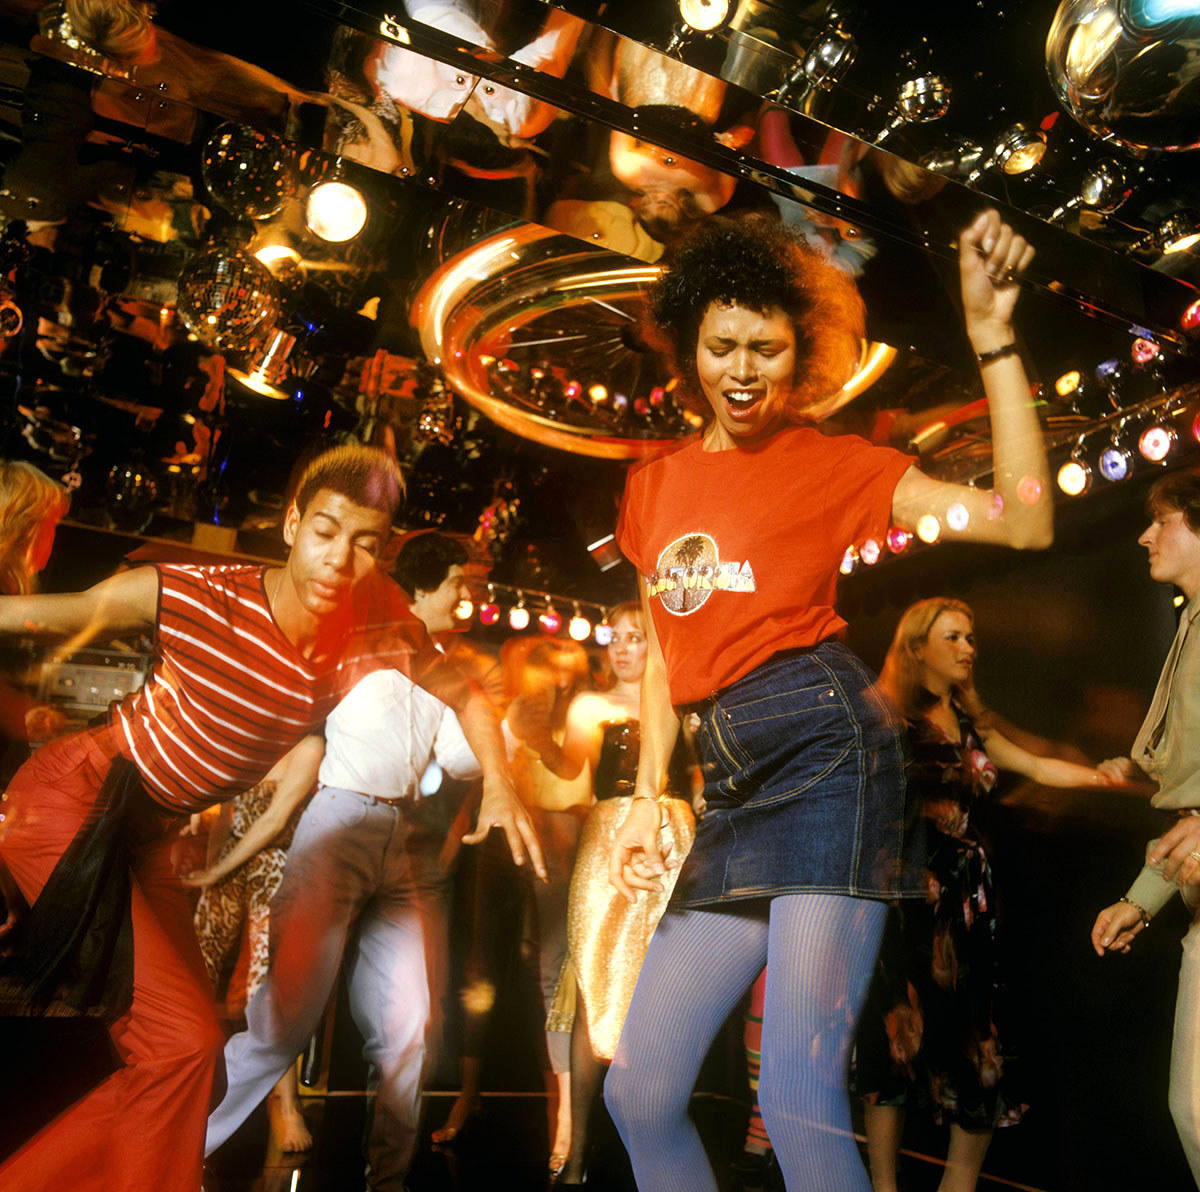 29 Pictures That Show Just How Crazy 1970s Disco Really Was